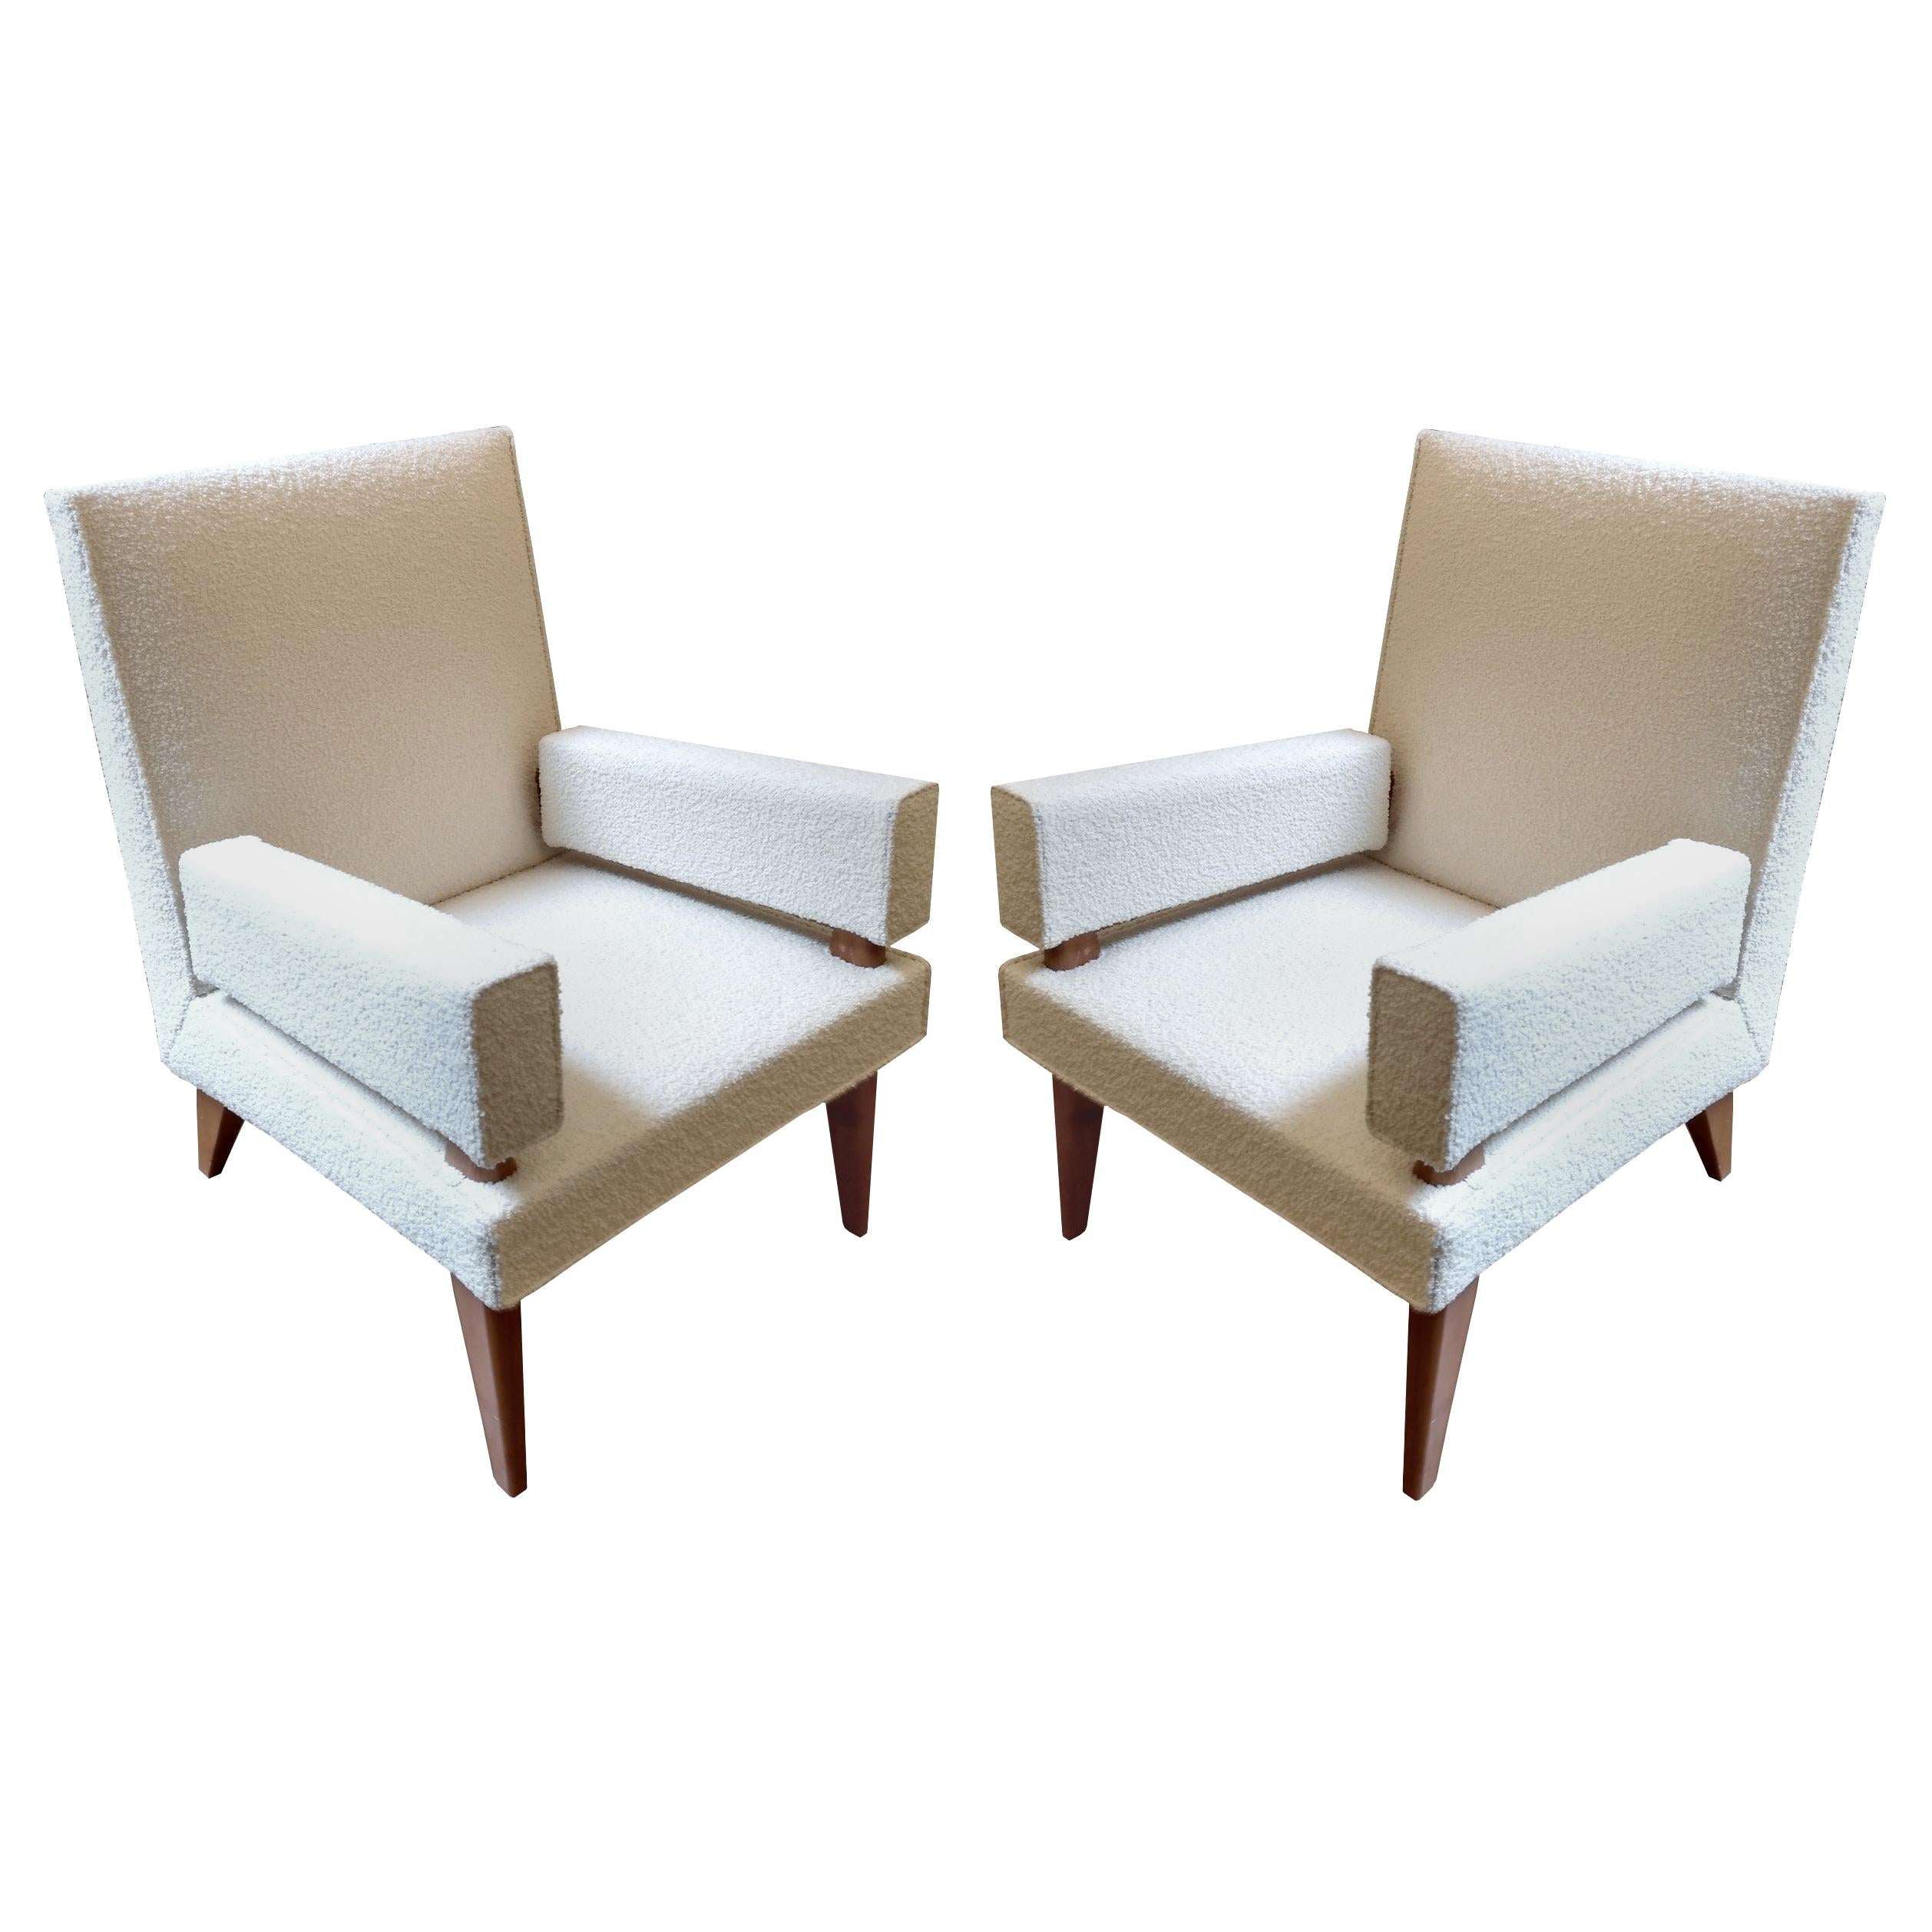 Maxime Old, Pair of Armchairs 369 Model, France, 1955-1958